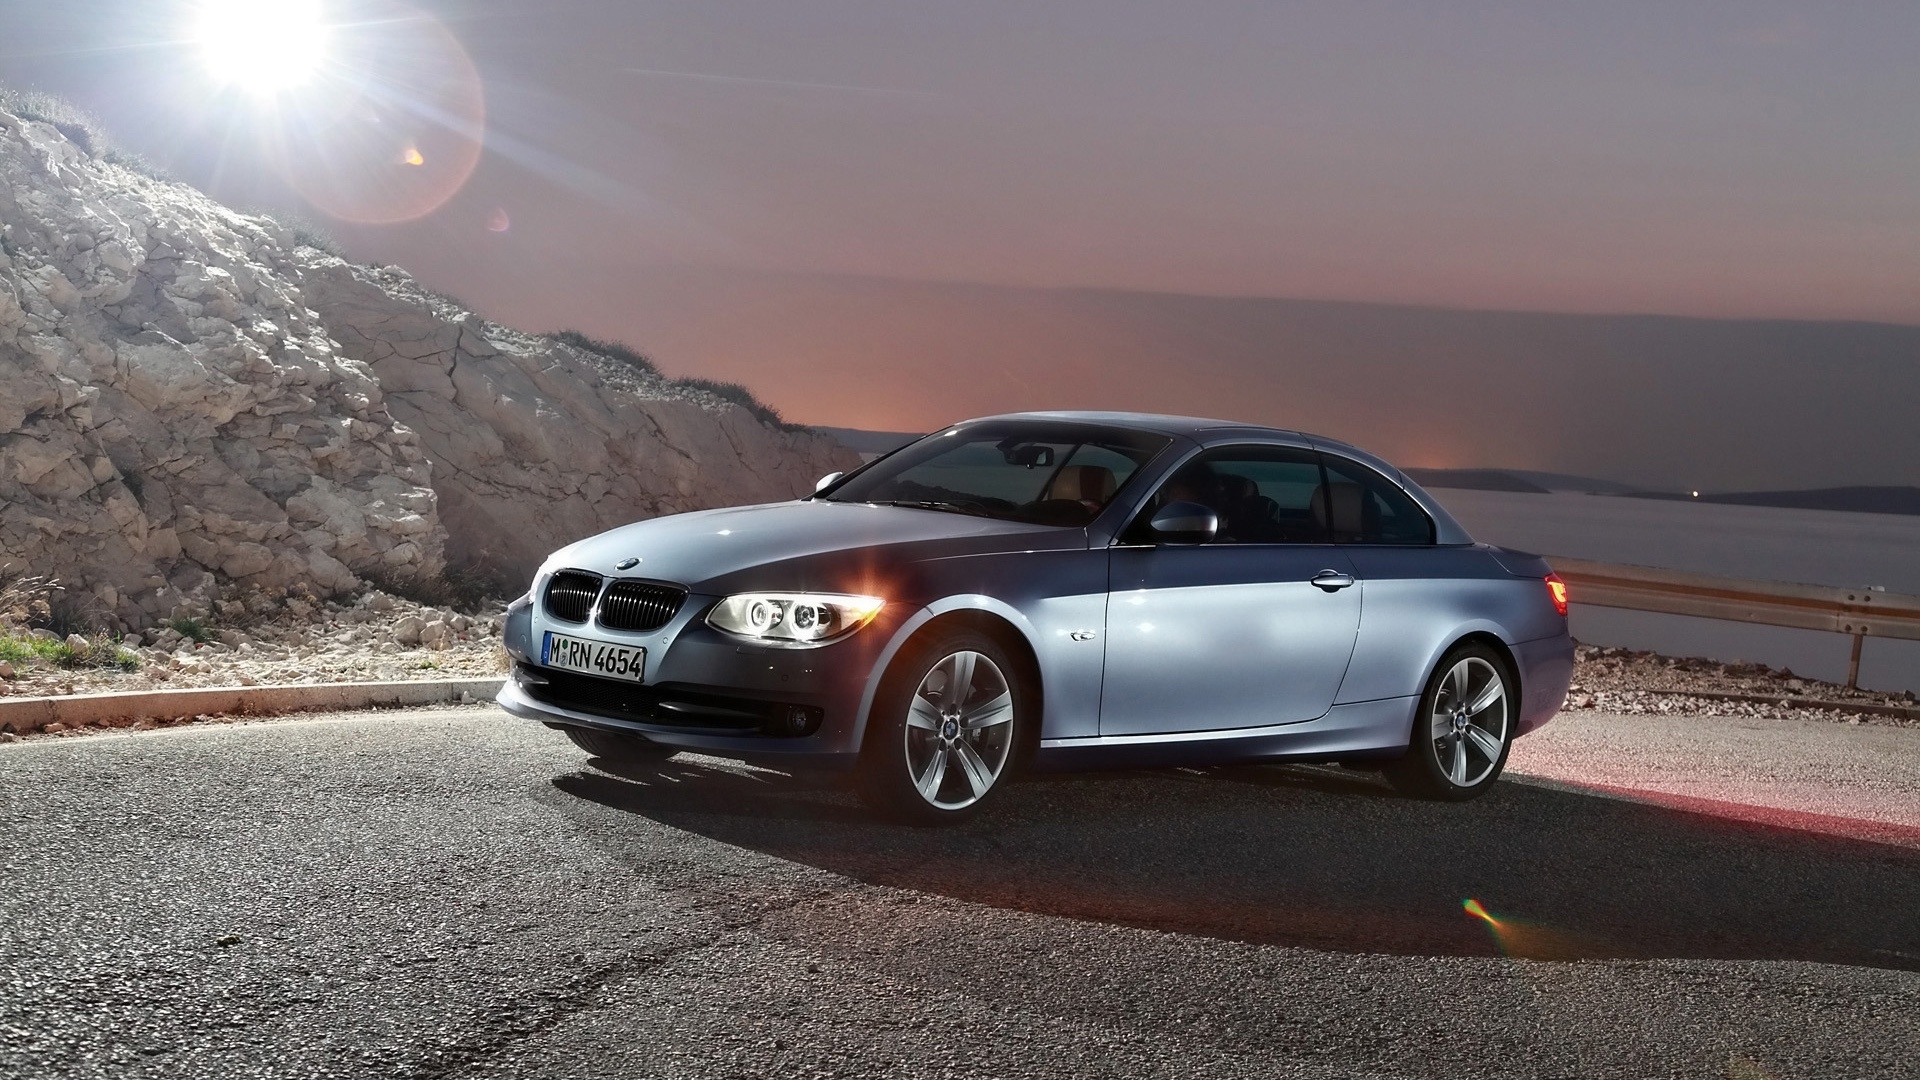 BMW 3 Series Silver 2010 Top Up for 1920 x 1080 HDTV 1080p resolution